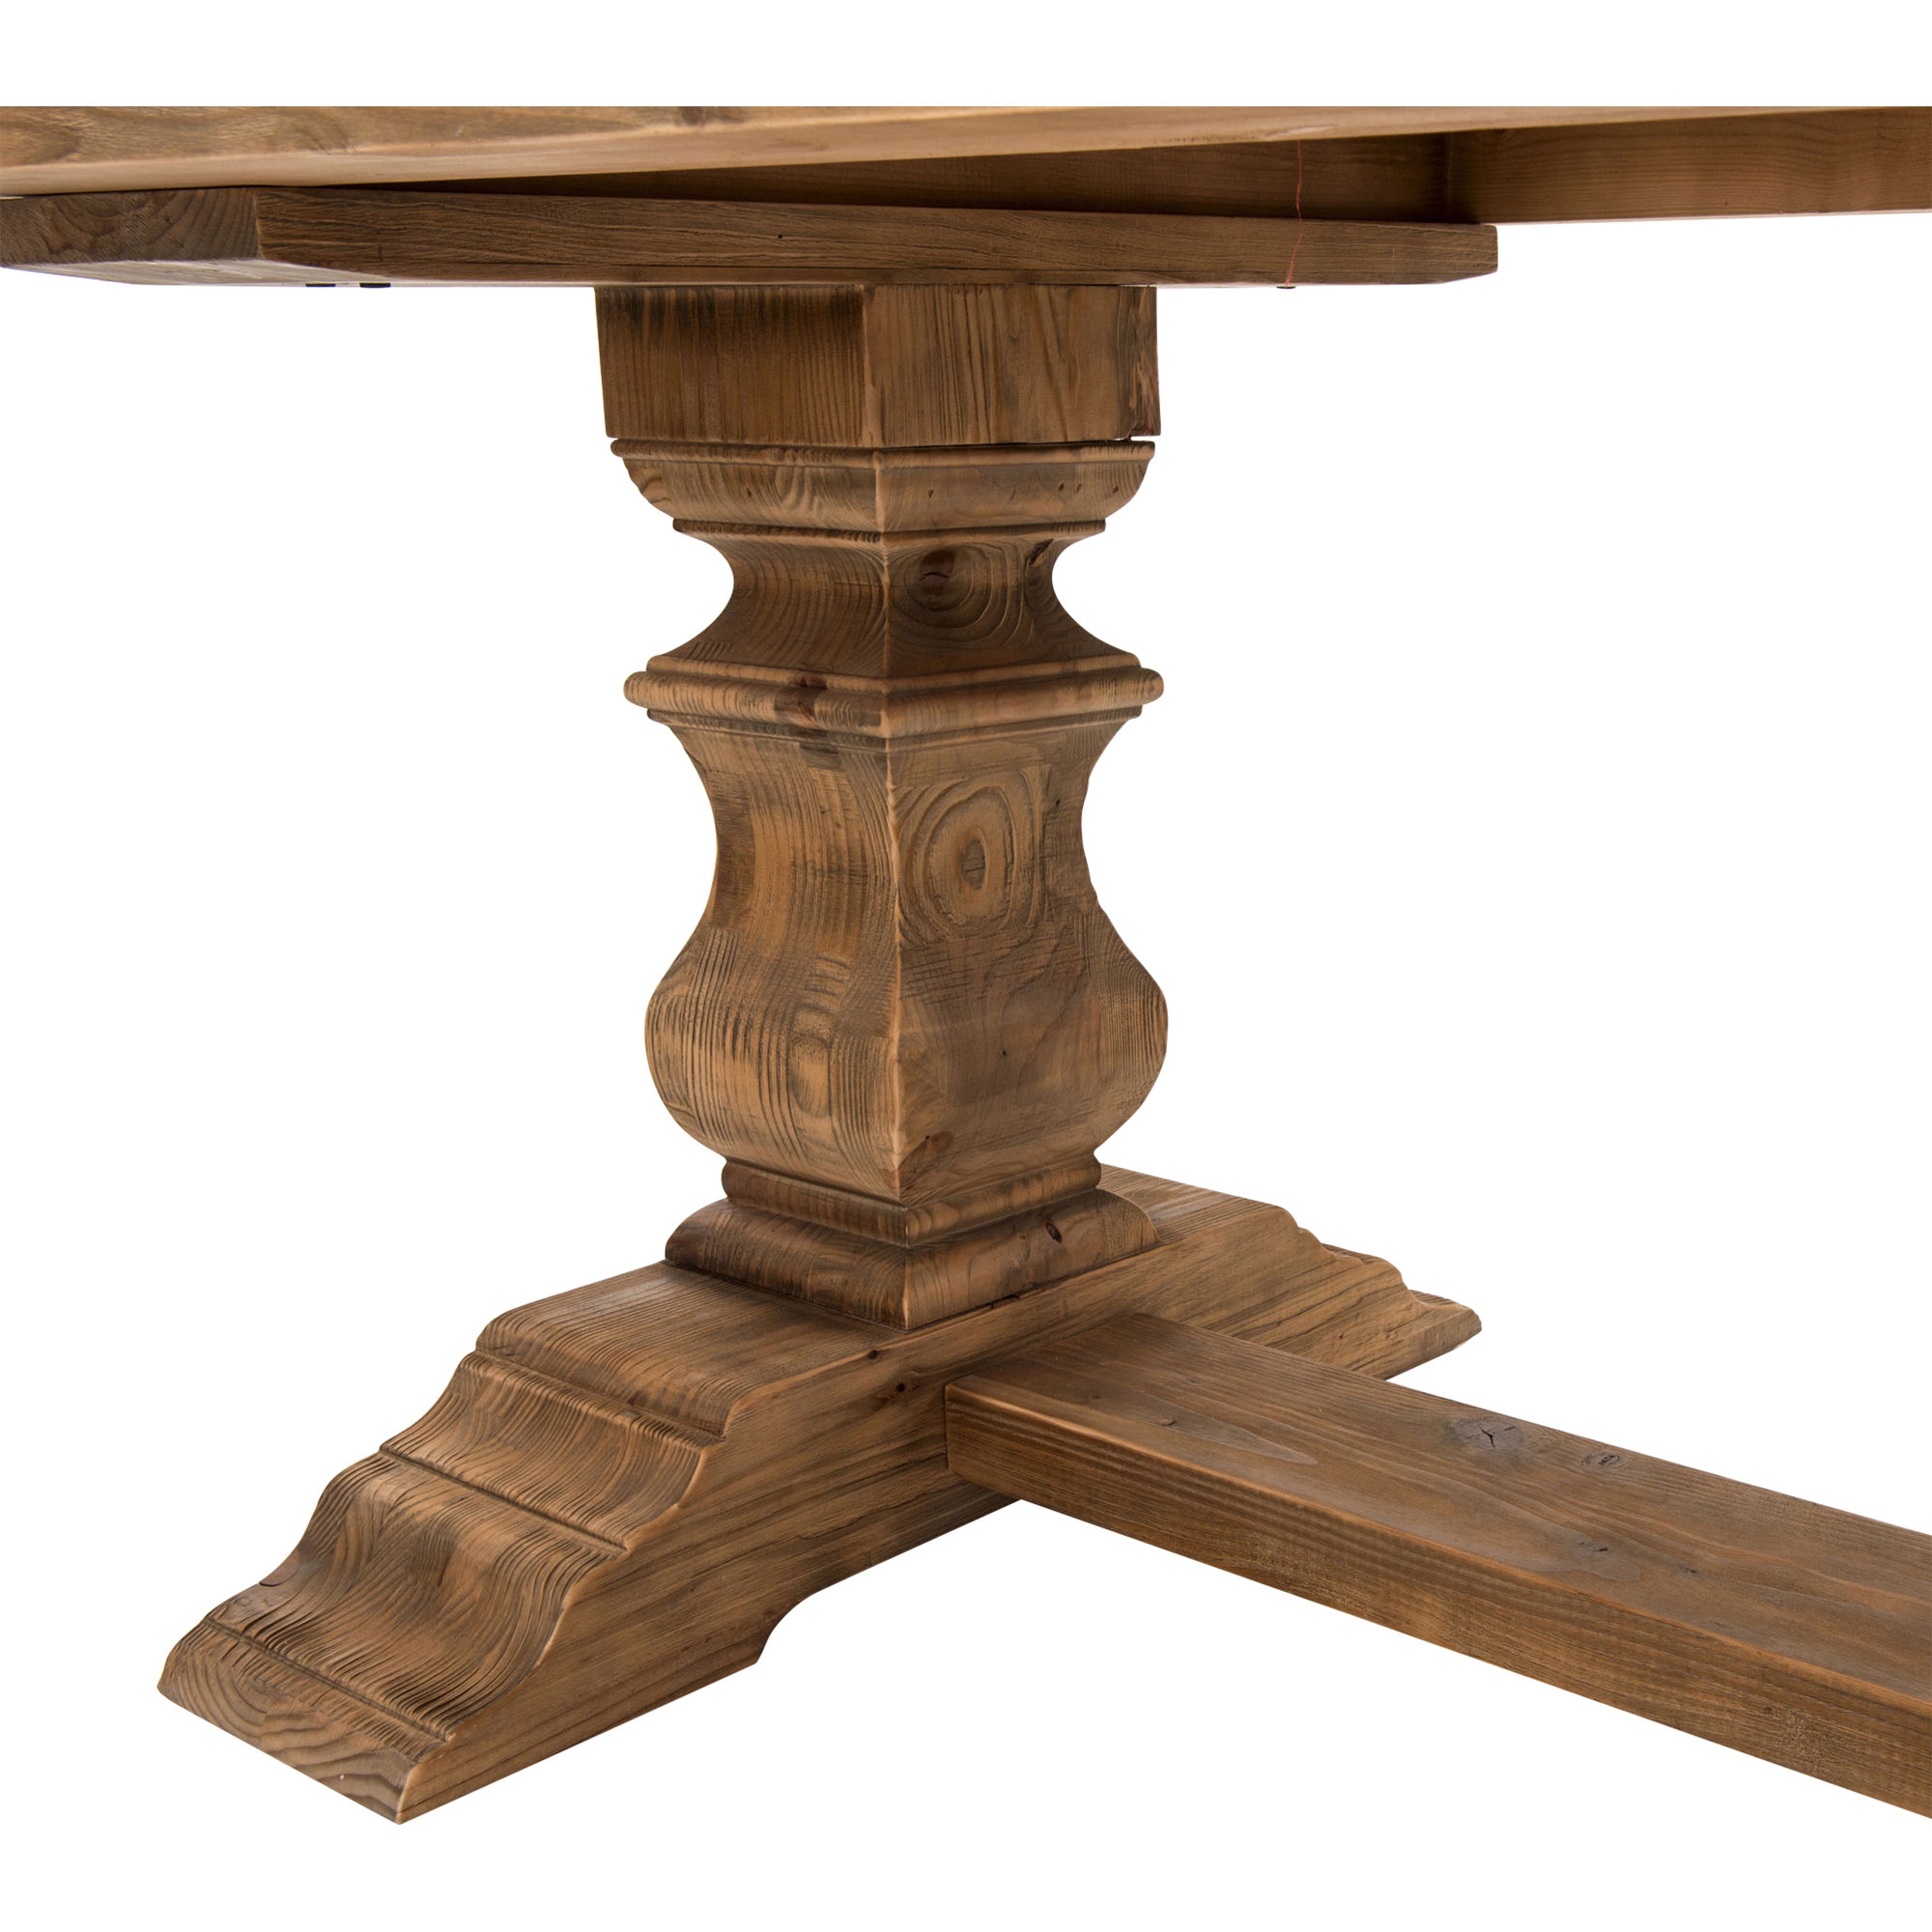 Ellicott Rustic Lodge Bleached Pine Trestle Dining Table - Image 5